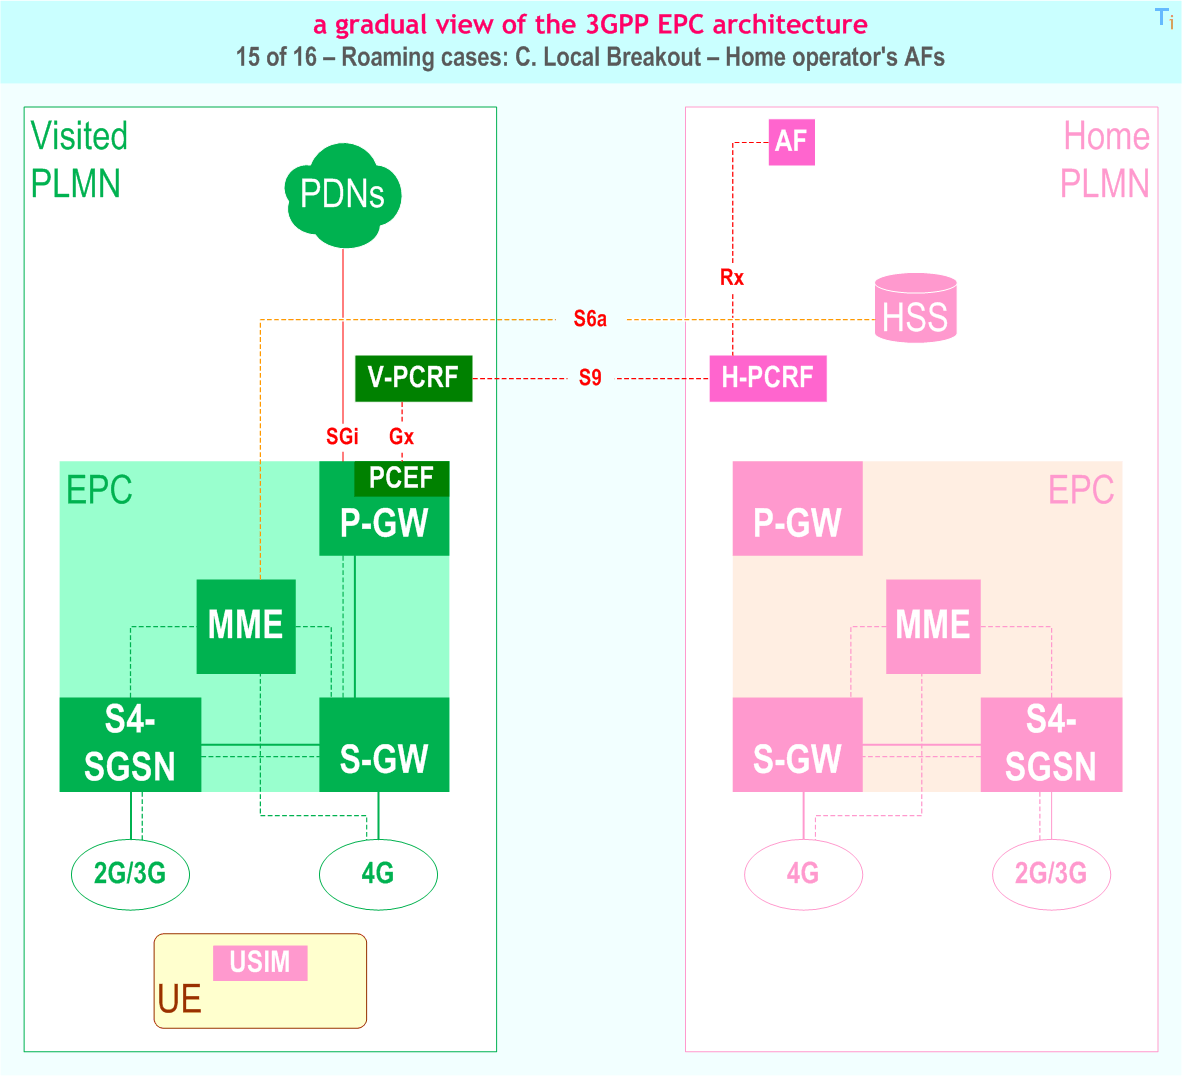 Gradual view of the 3GPP EPC (Evolved Packet Core) architecture - 15 of 16 - EPC Roaming: Local Breakout - with home operator's AFs